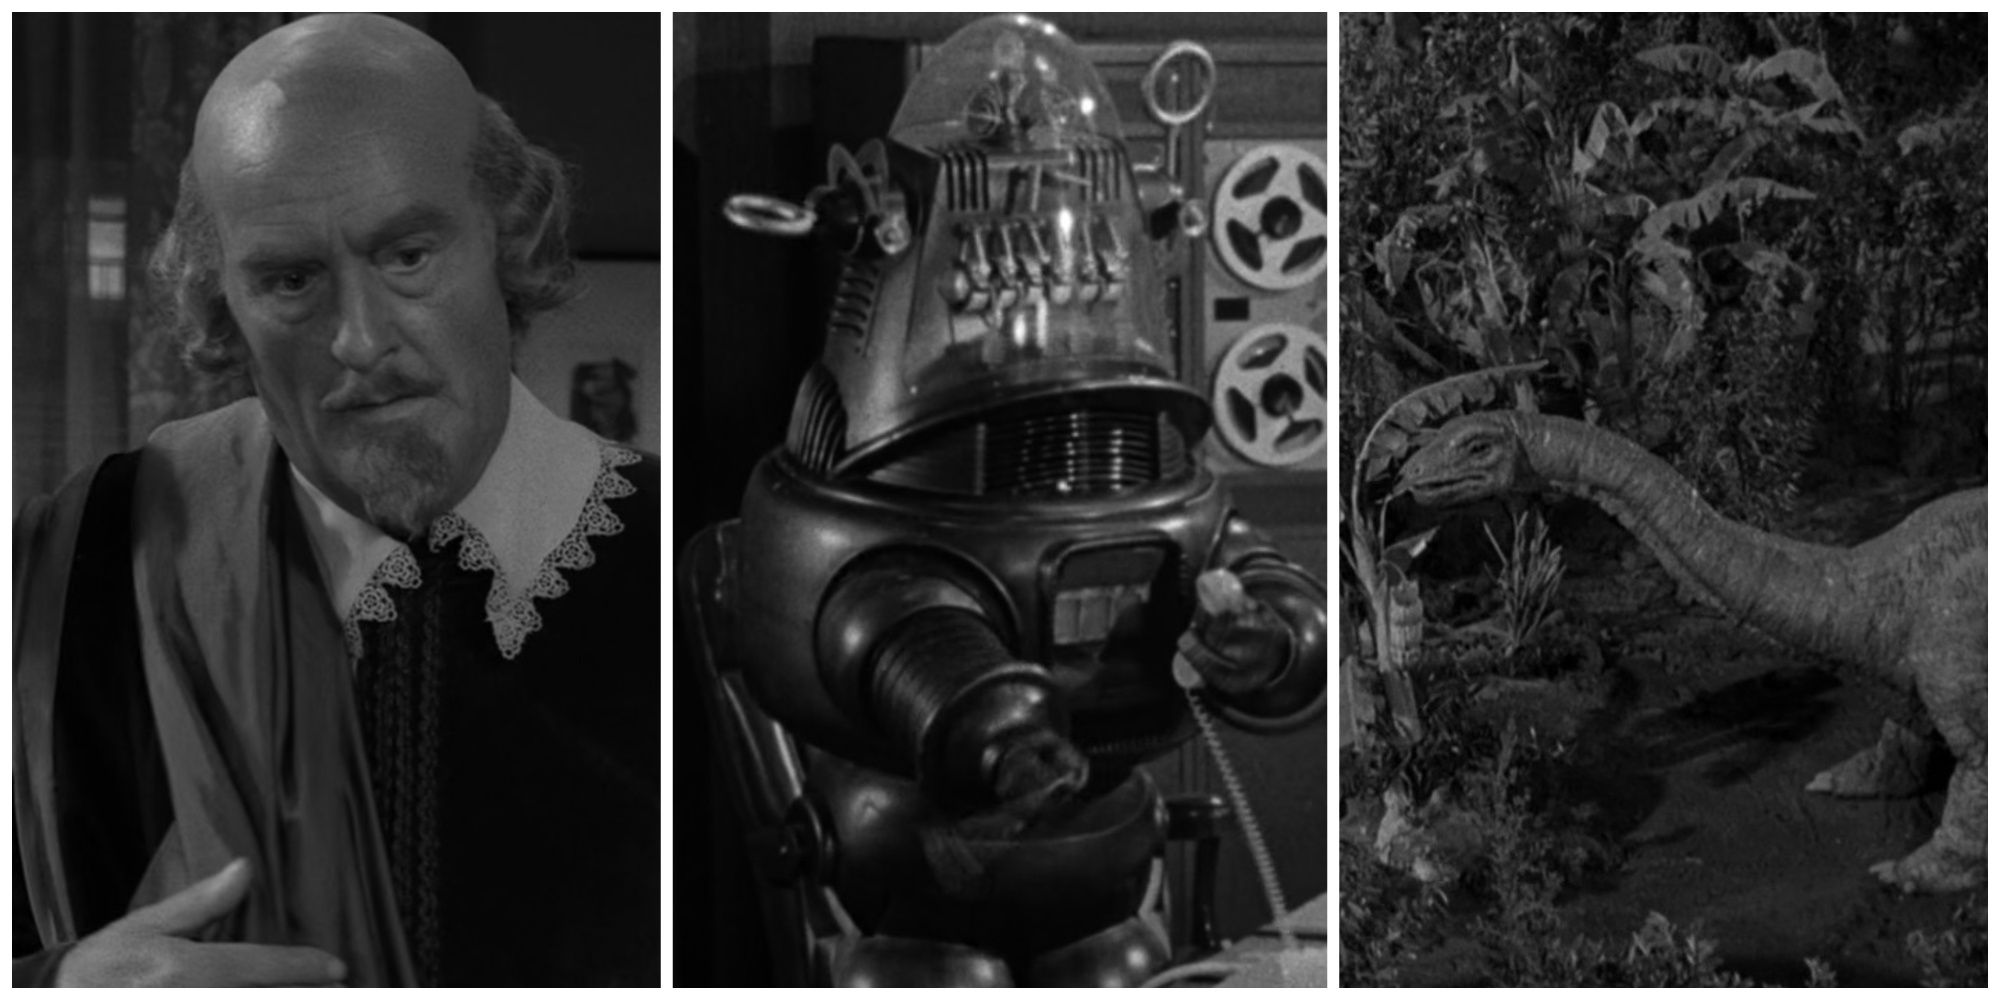 Split image showing Shakespeare, a robot, and a dinosaur in The Twilight Zone.